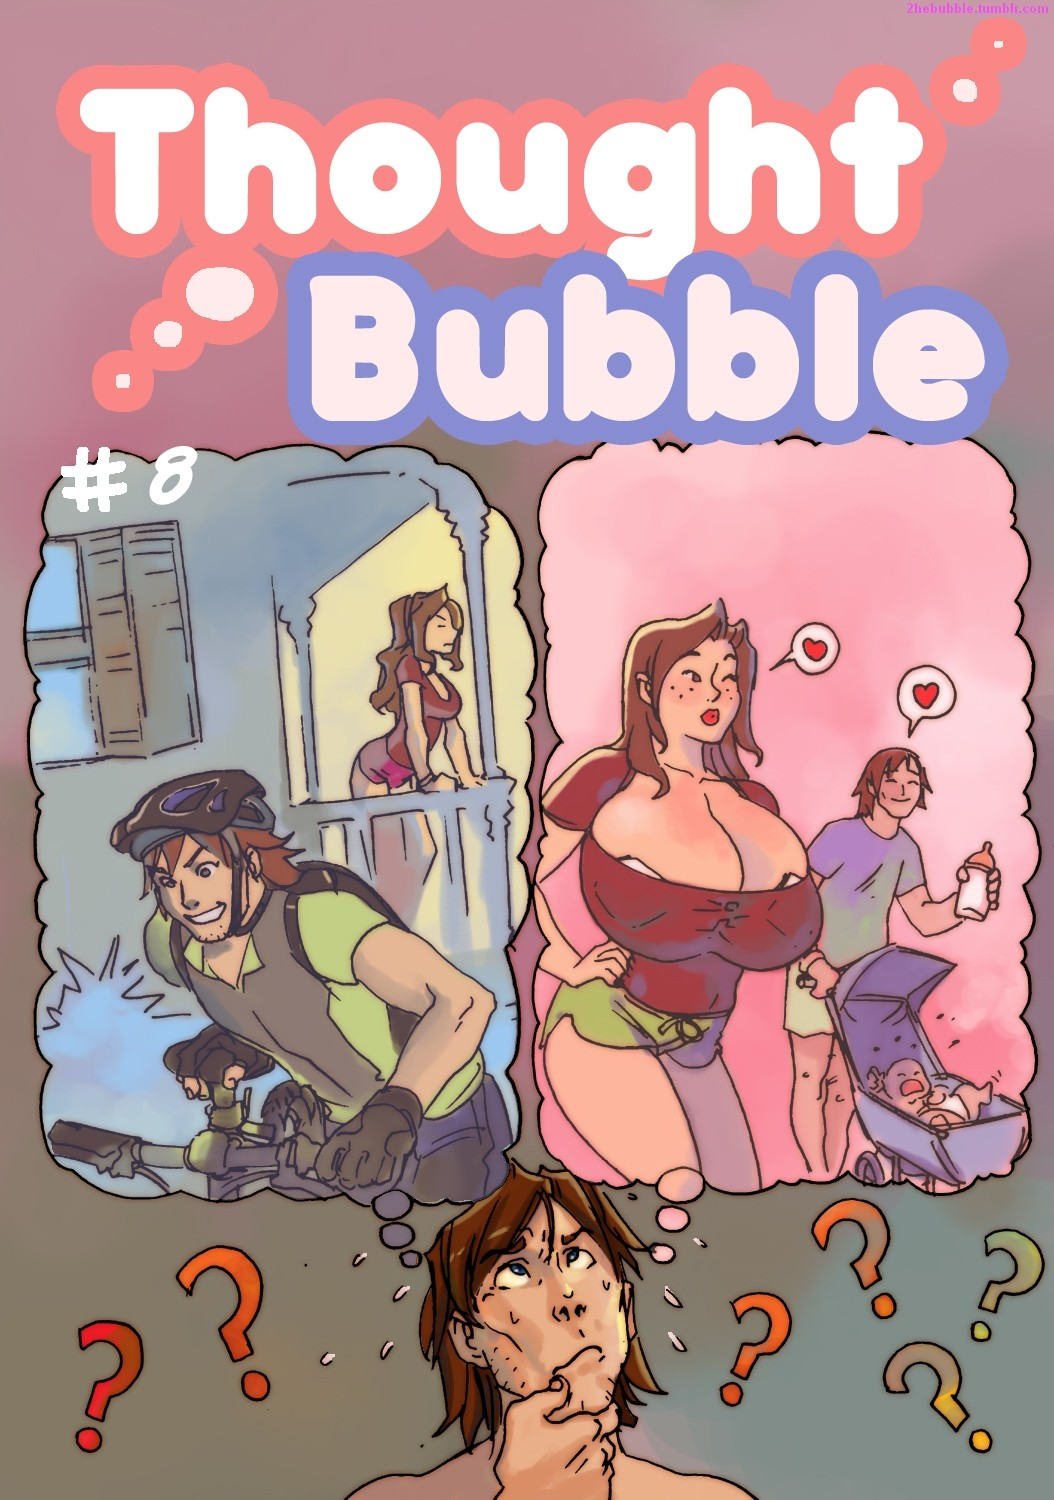 Sidneymt - Thought Bubble 8 Porn Comic